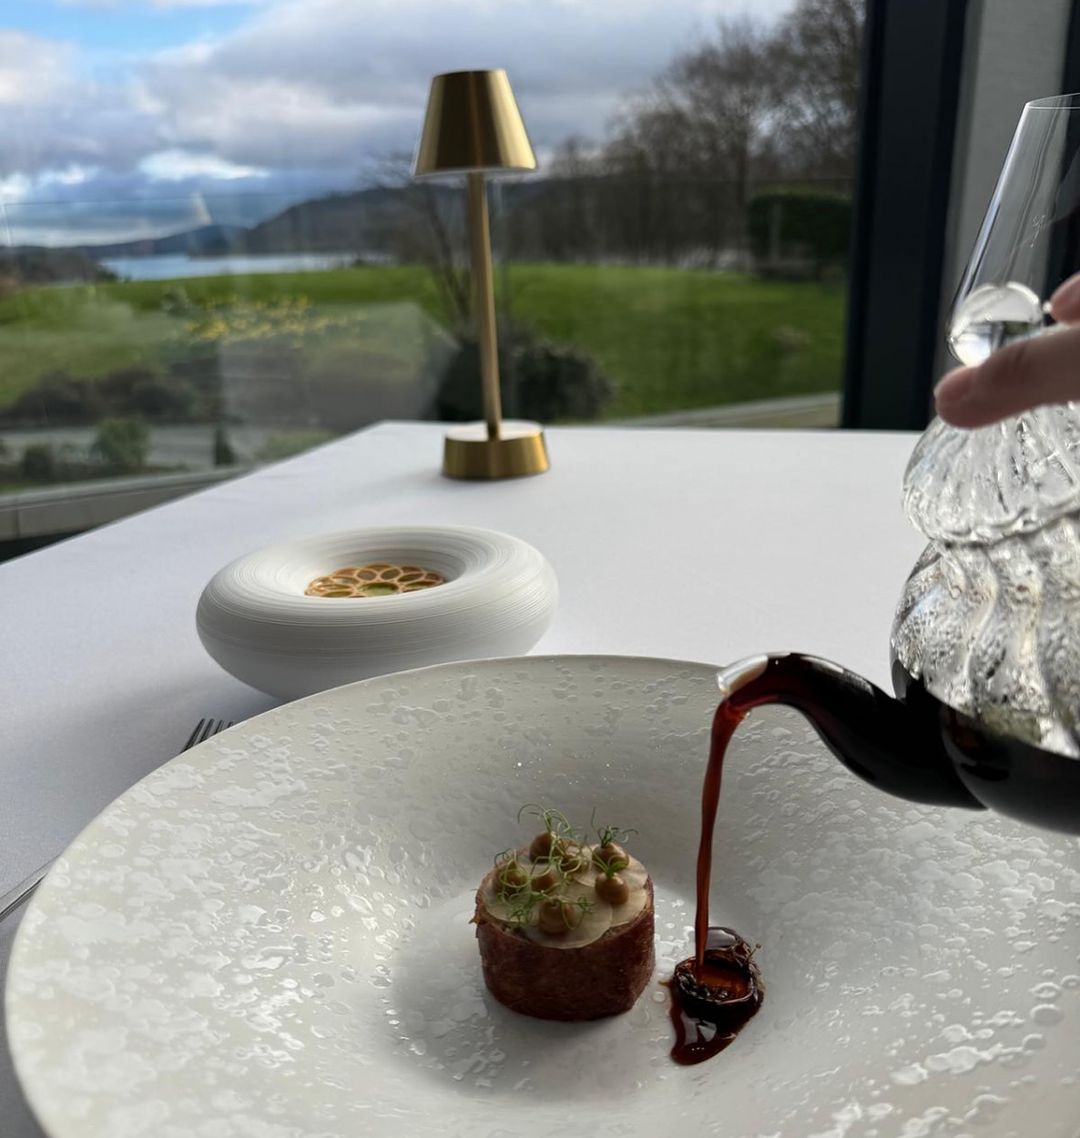 When staying at The Samling you absolutely MUST book into their Michelin Star restaurant and enjoy the delights of Executive Head Chef Robby Jenks like this Herdwick Lamb dish 🍽 tinyurl.com/4r5kn8ds